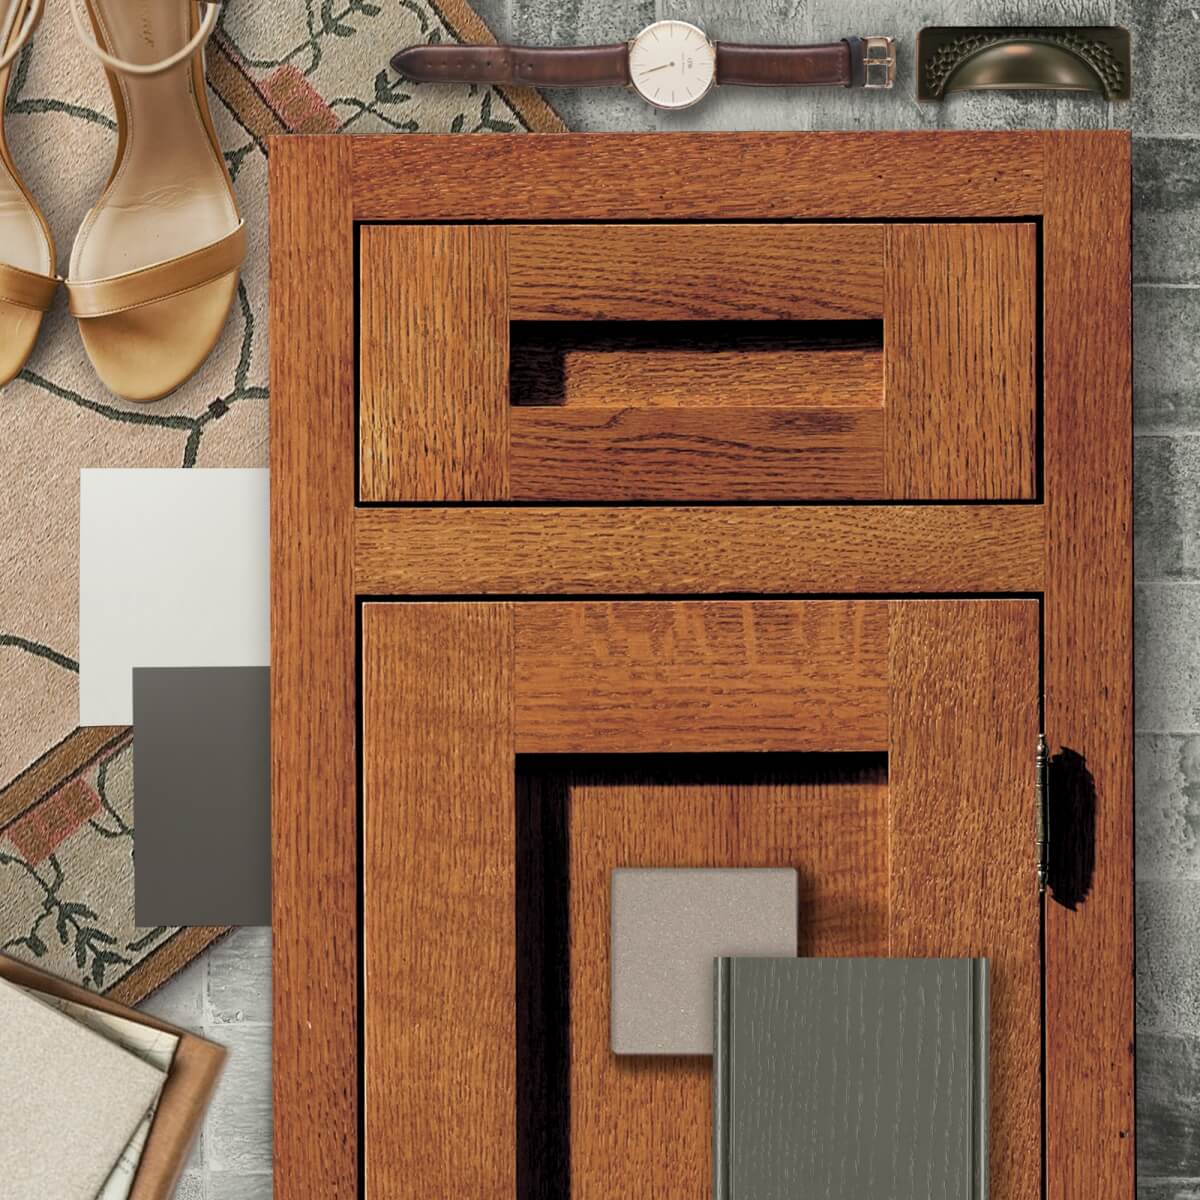 A classic crafsman styled kitchen design mood board with quartersawn red oak and a warn red stain.